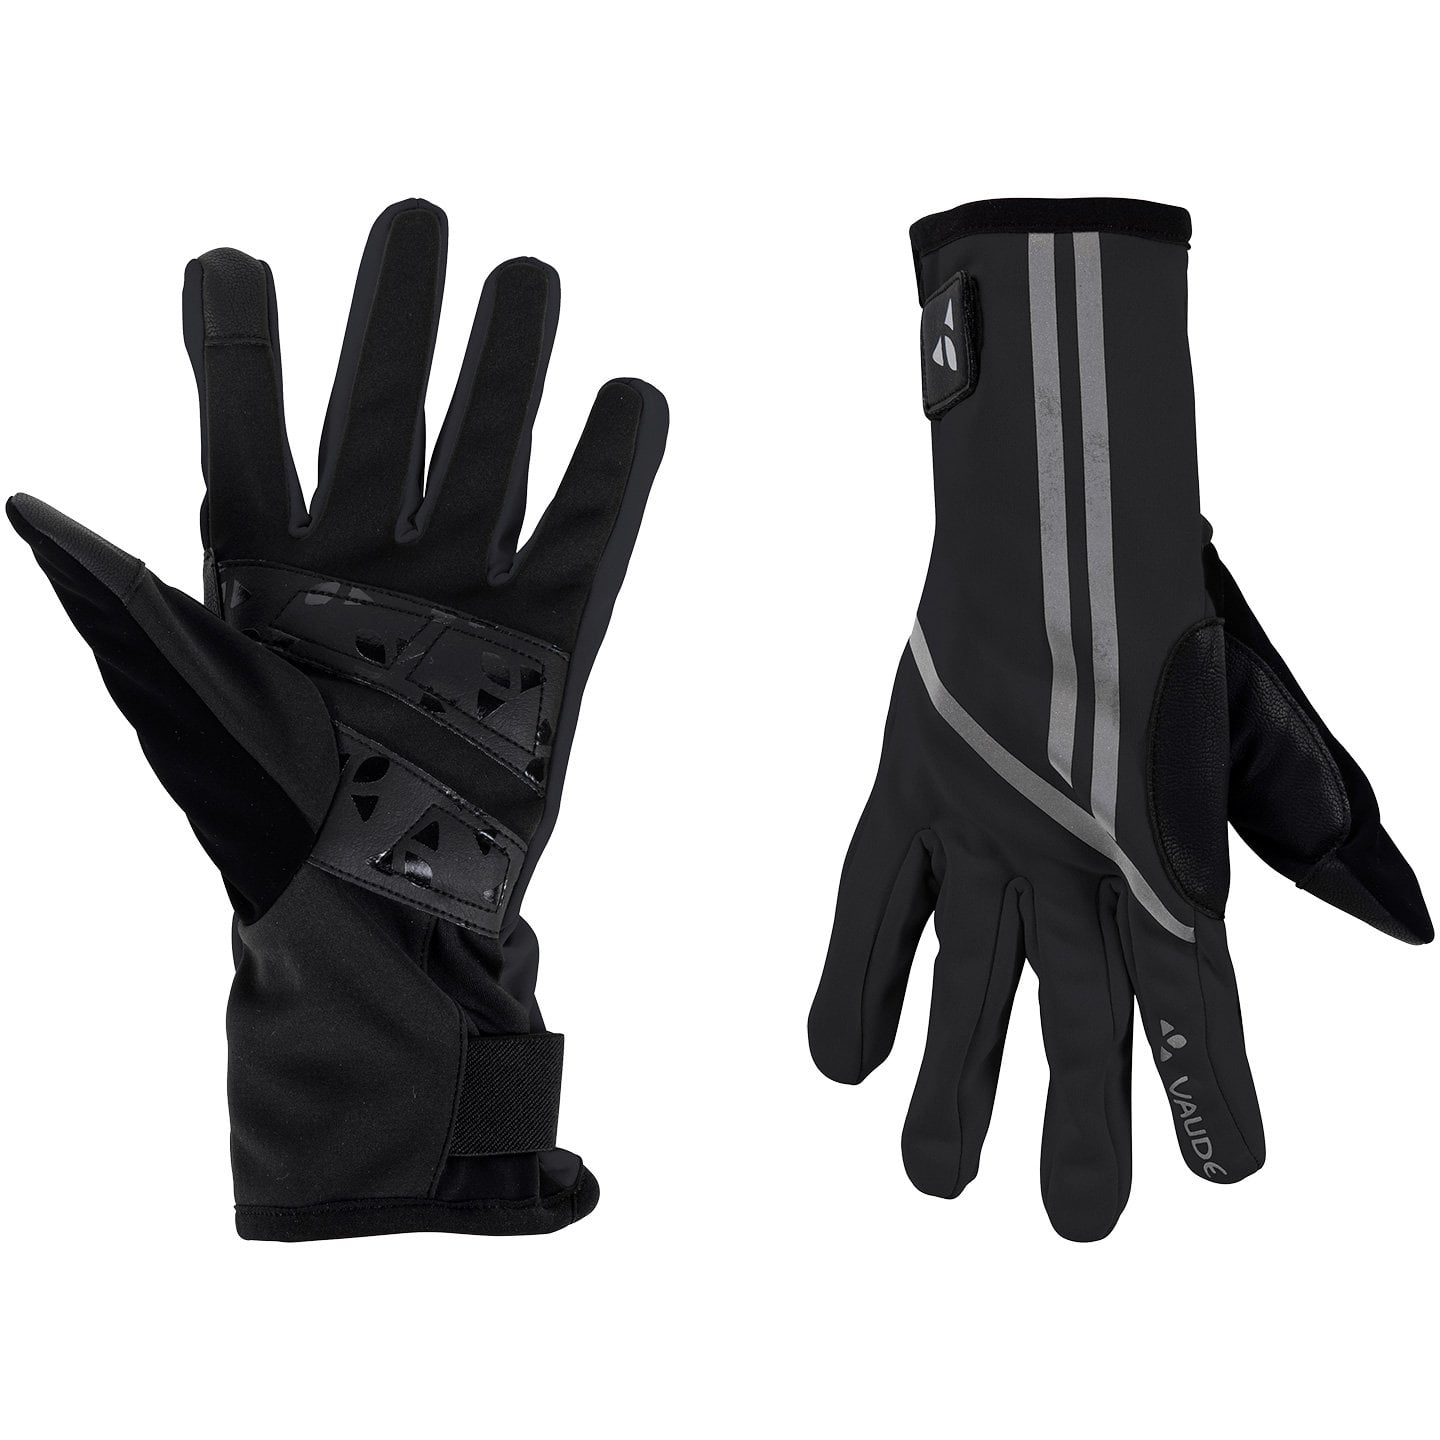 VAUDE Posta Warm Winter Gloves Winter Cycling Gloves, for men, size 10, Cycle gloves, Cycle wear